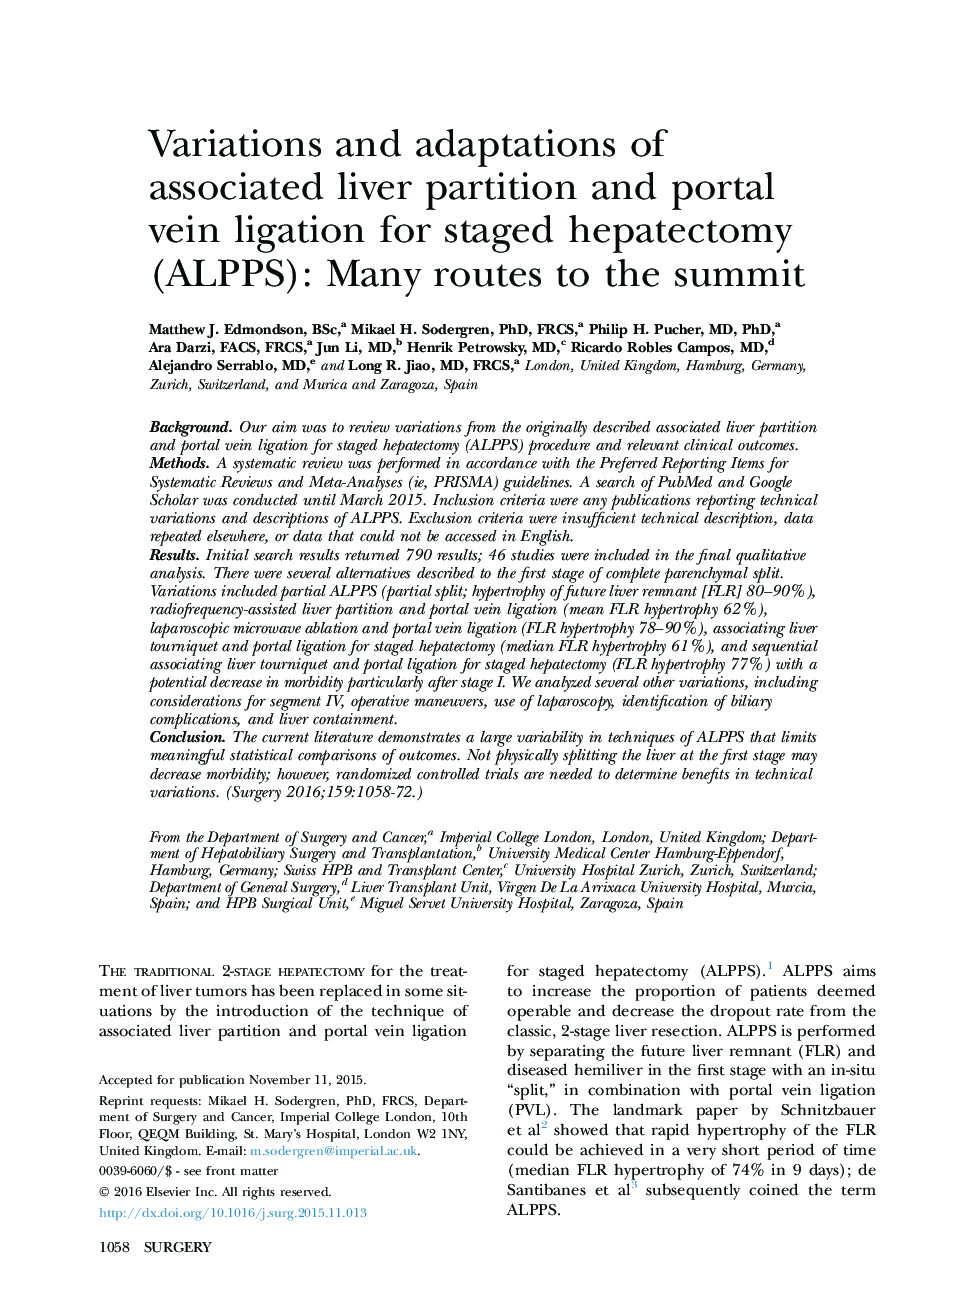 Variations and adaptations of associated liver partition and portal vein ligation for staged hepatectomy (ALPPS): Many routes to the summit